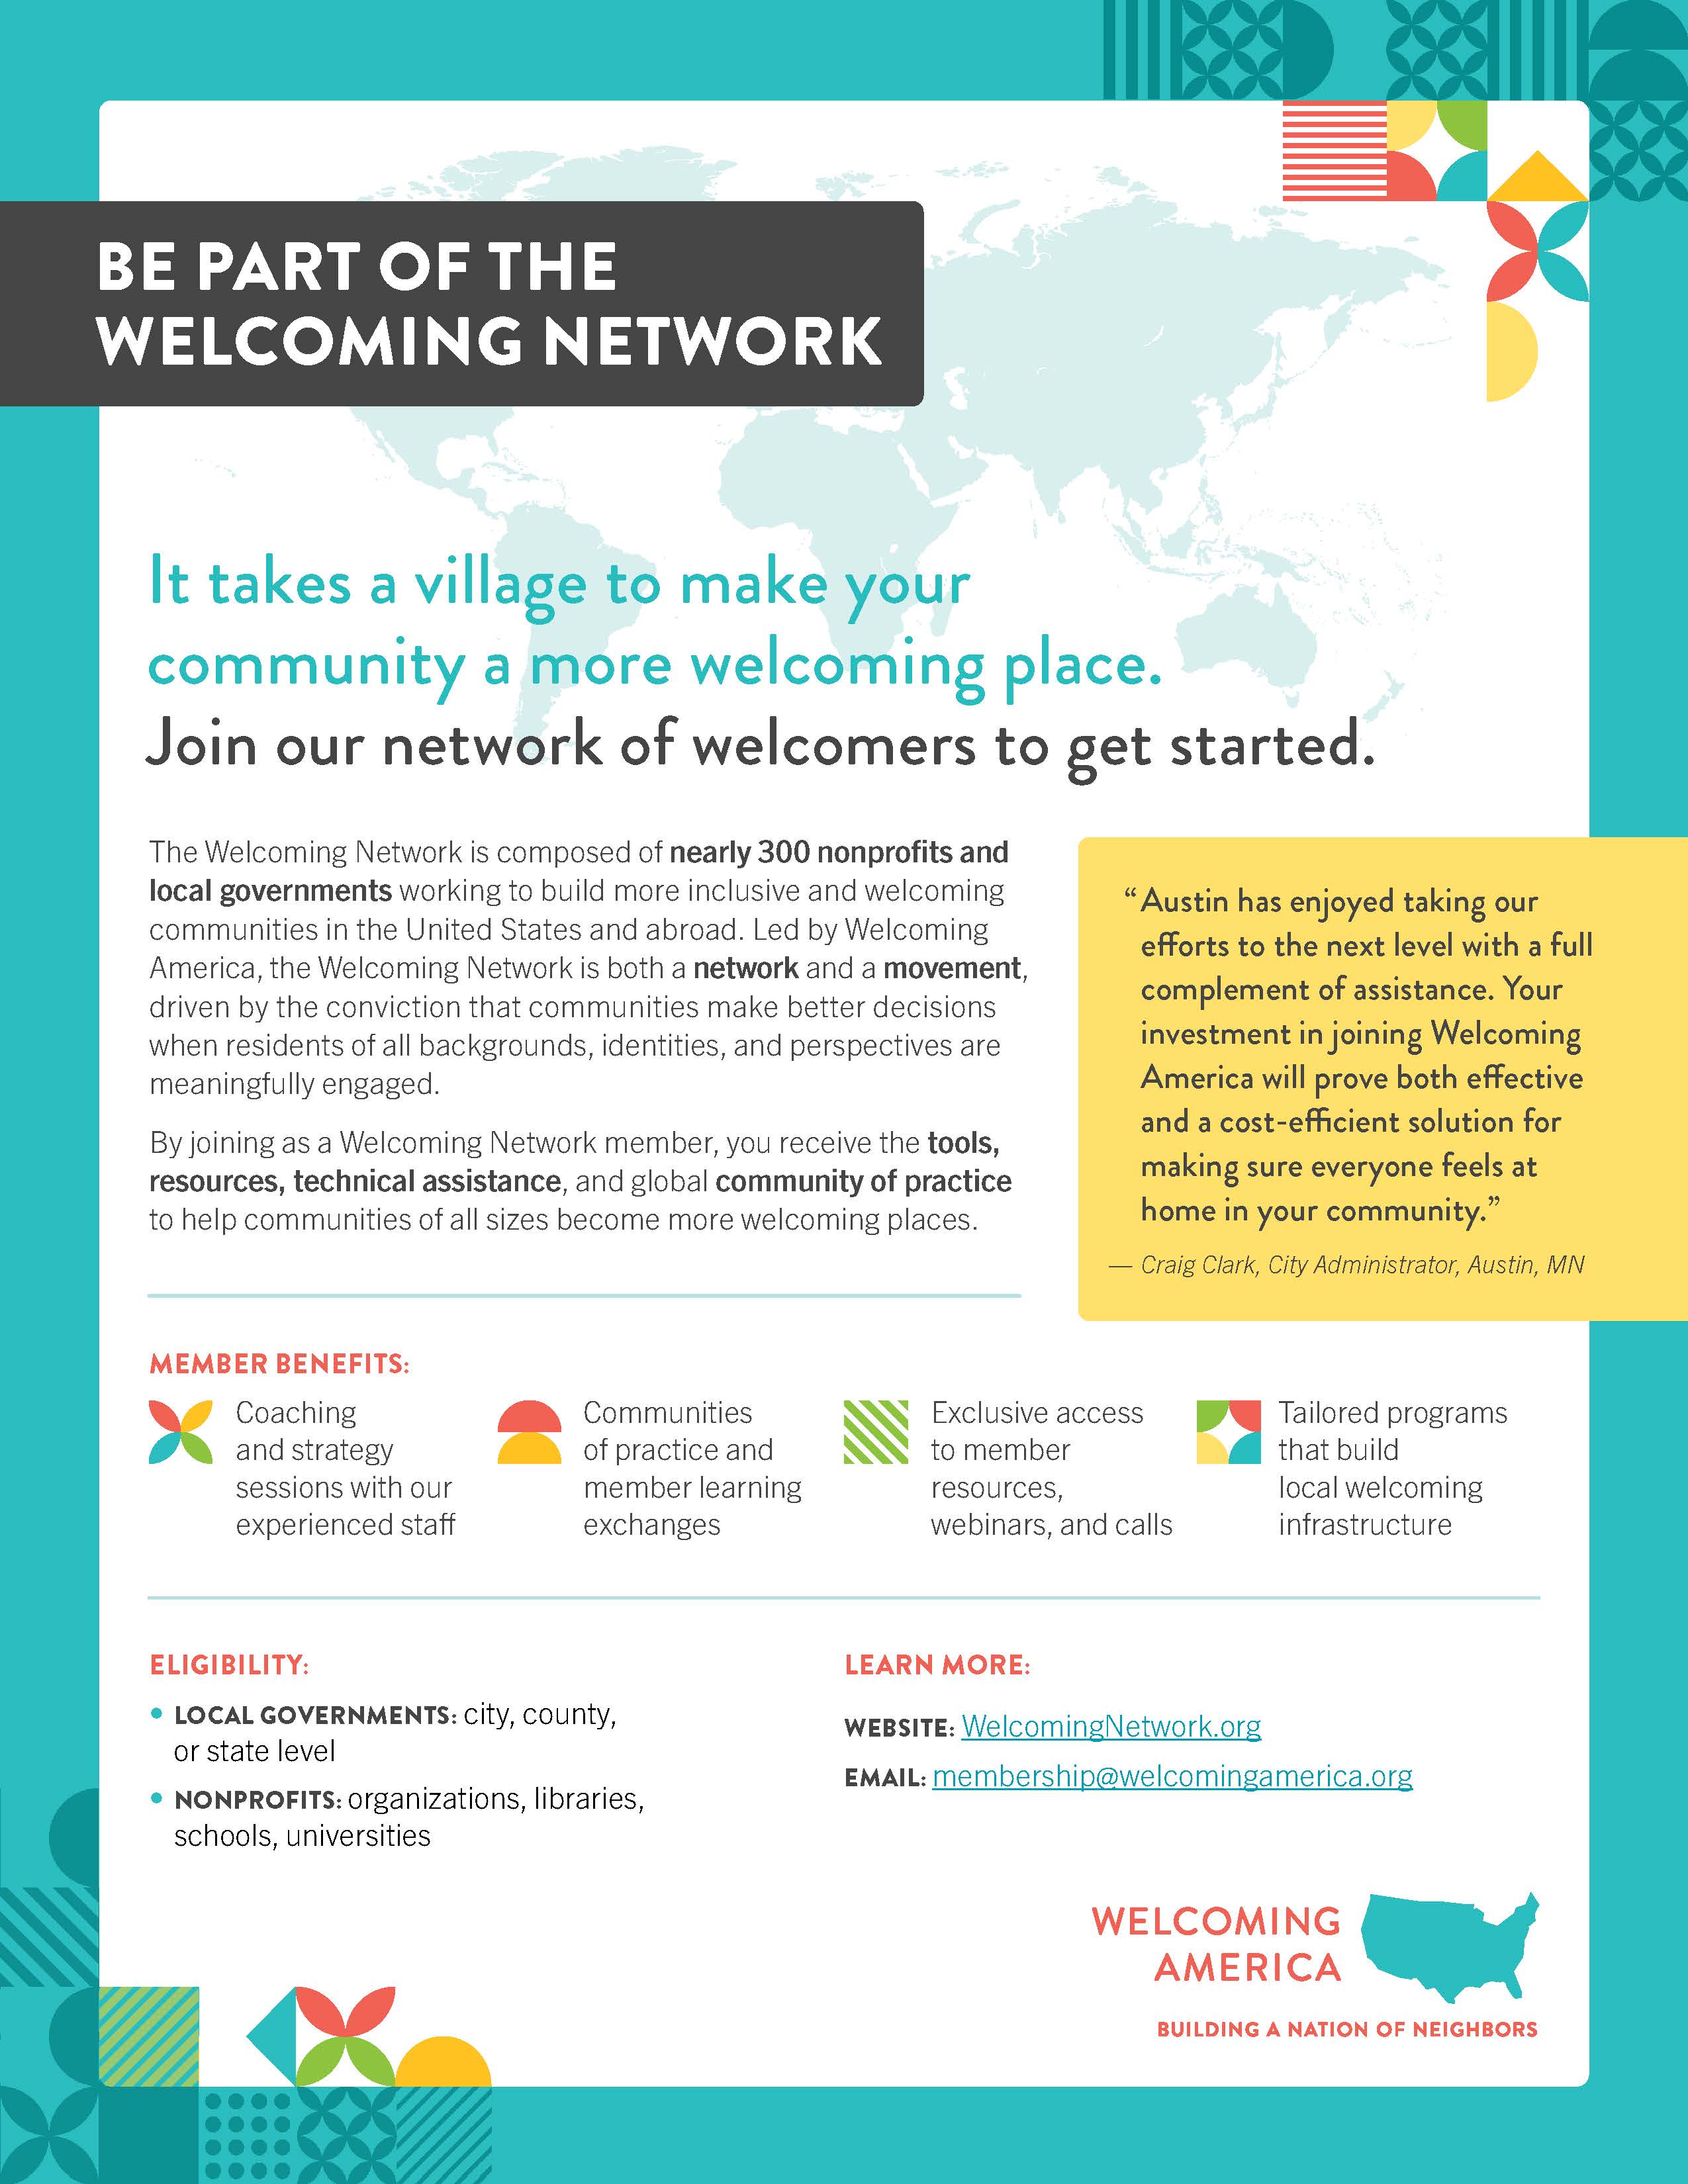 Be Part of the Welcoming Network flyer.